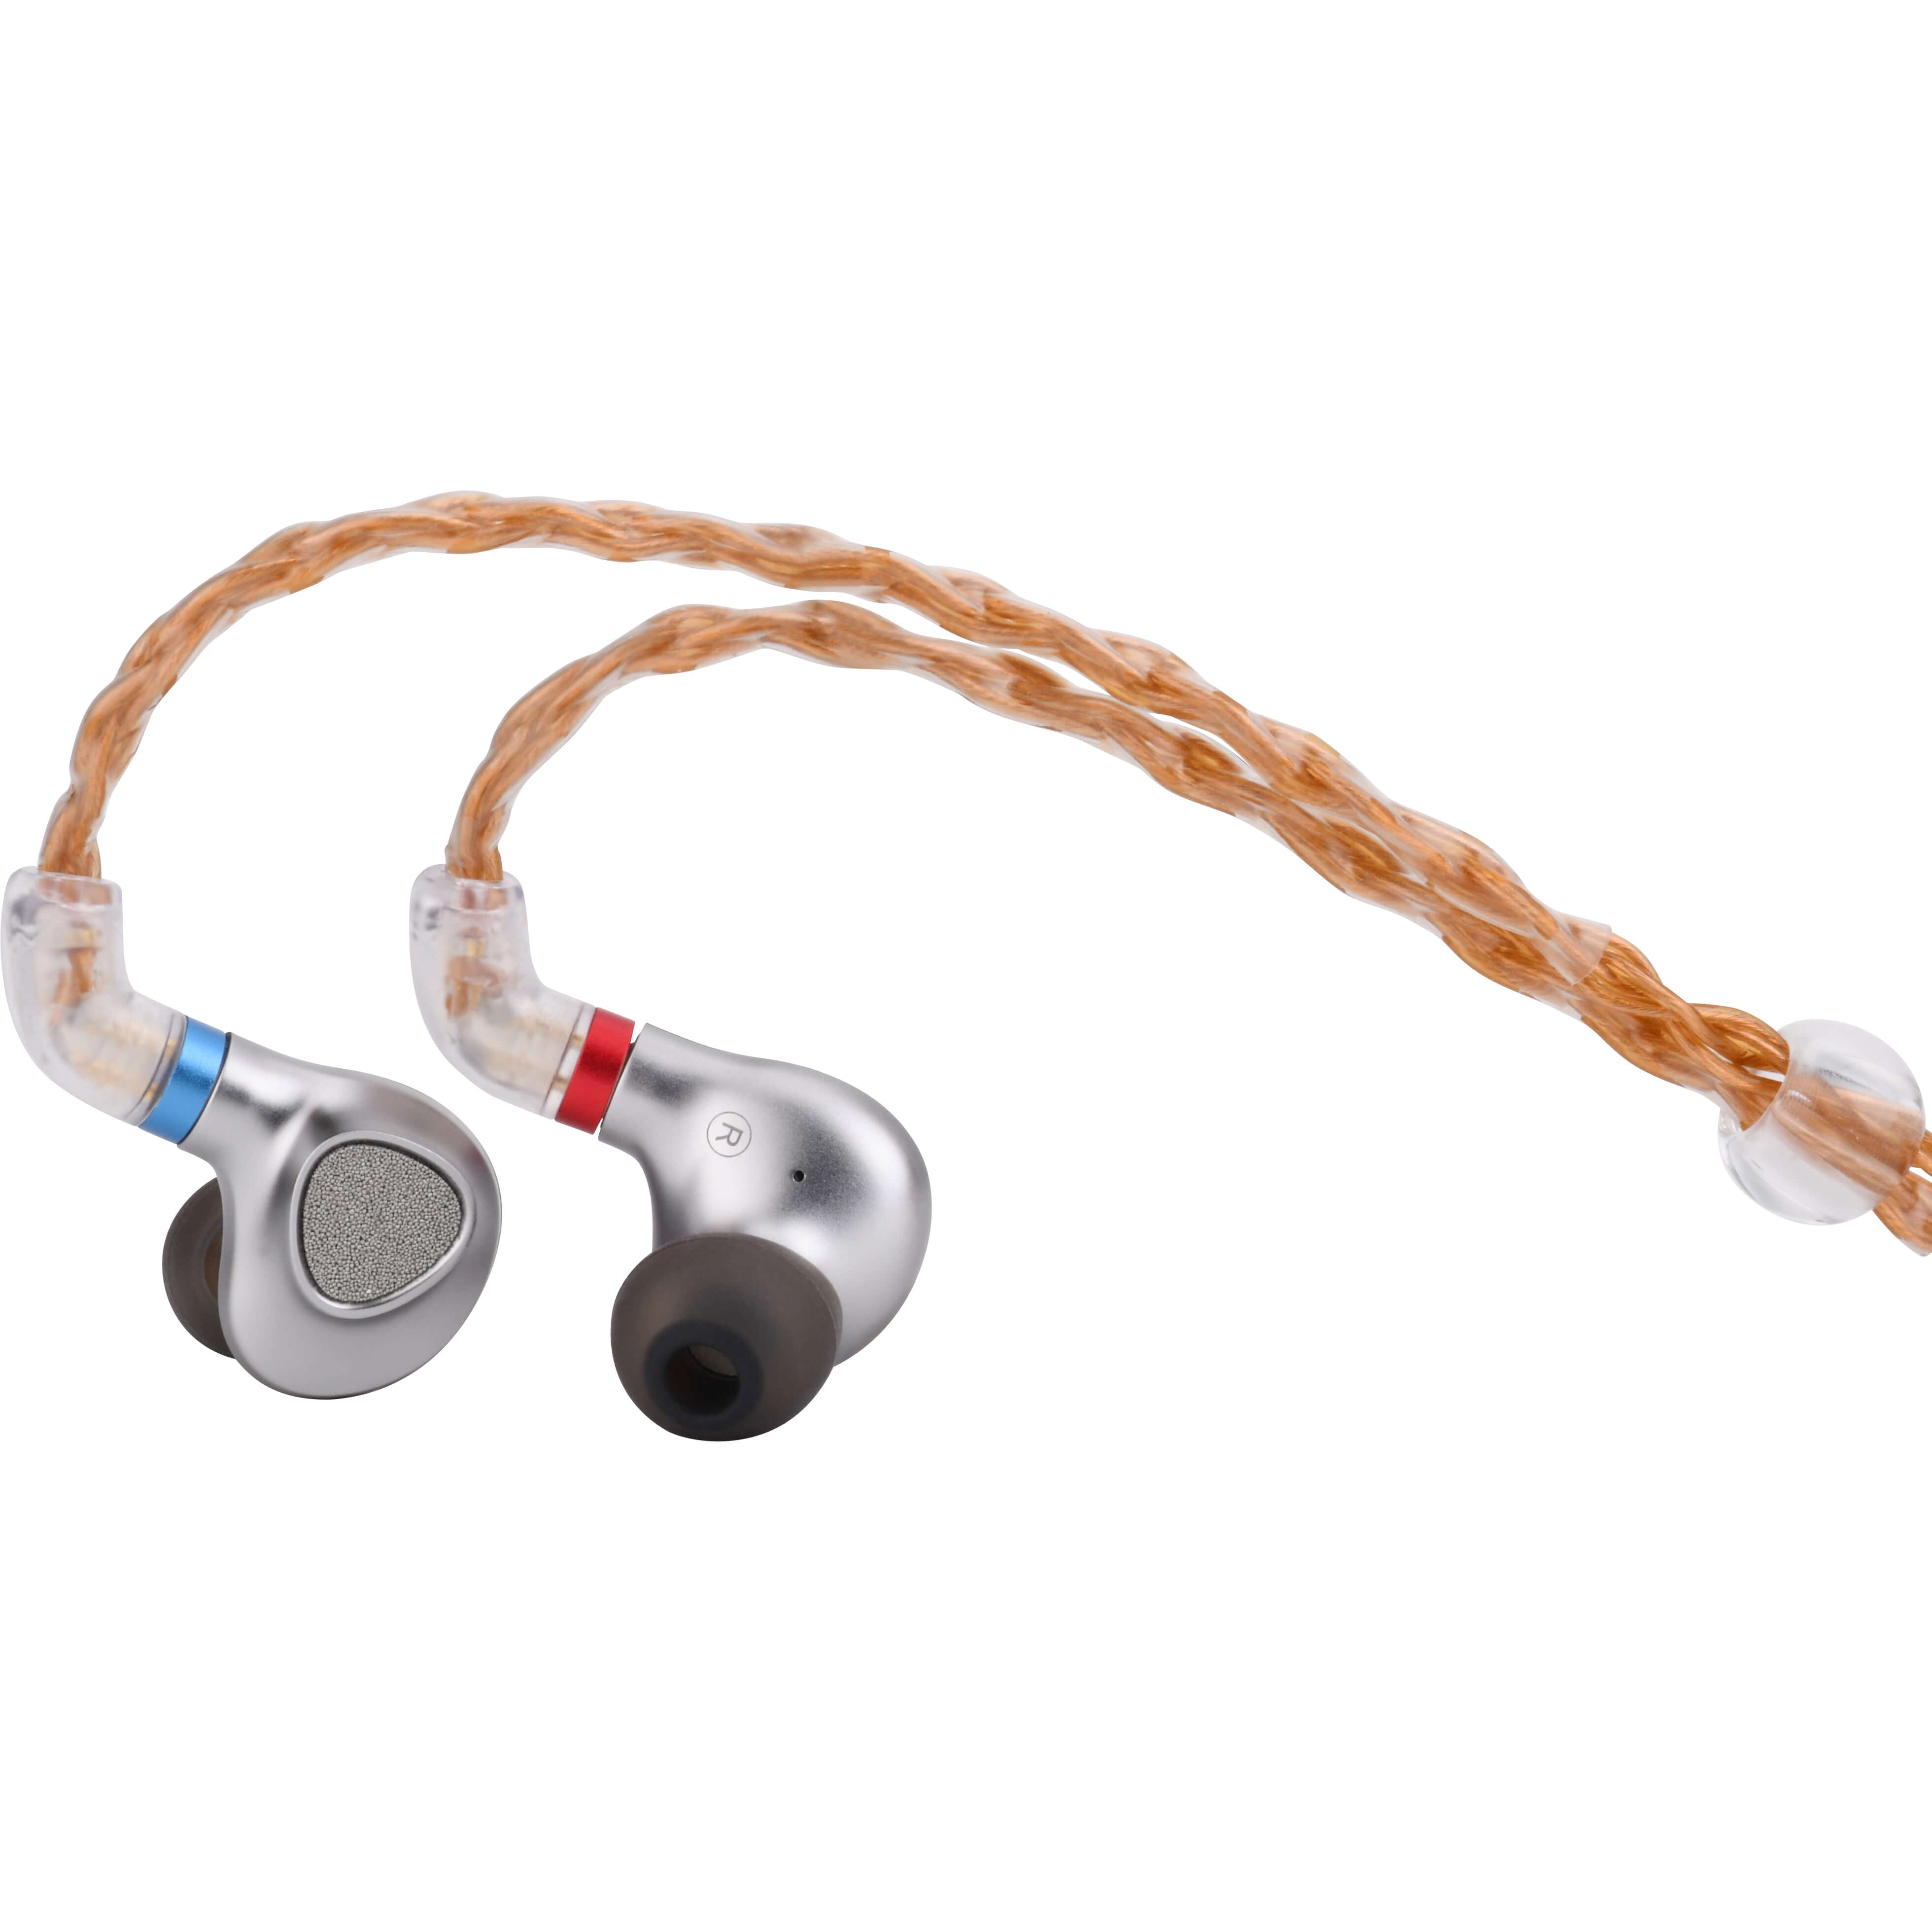 Buy Tin HiFi P2 Earphone at HiFiNage in India with warranty.